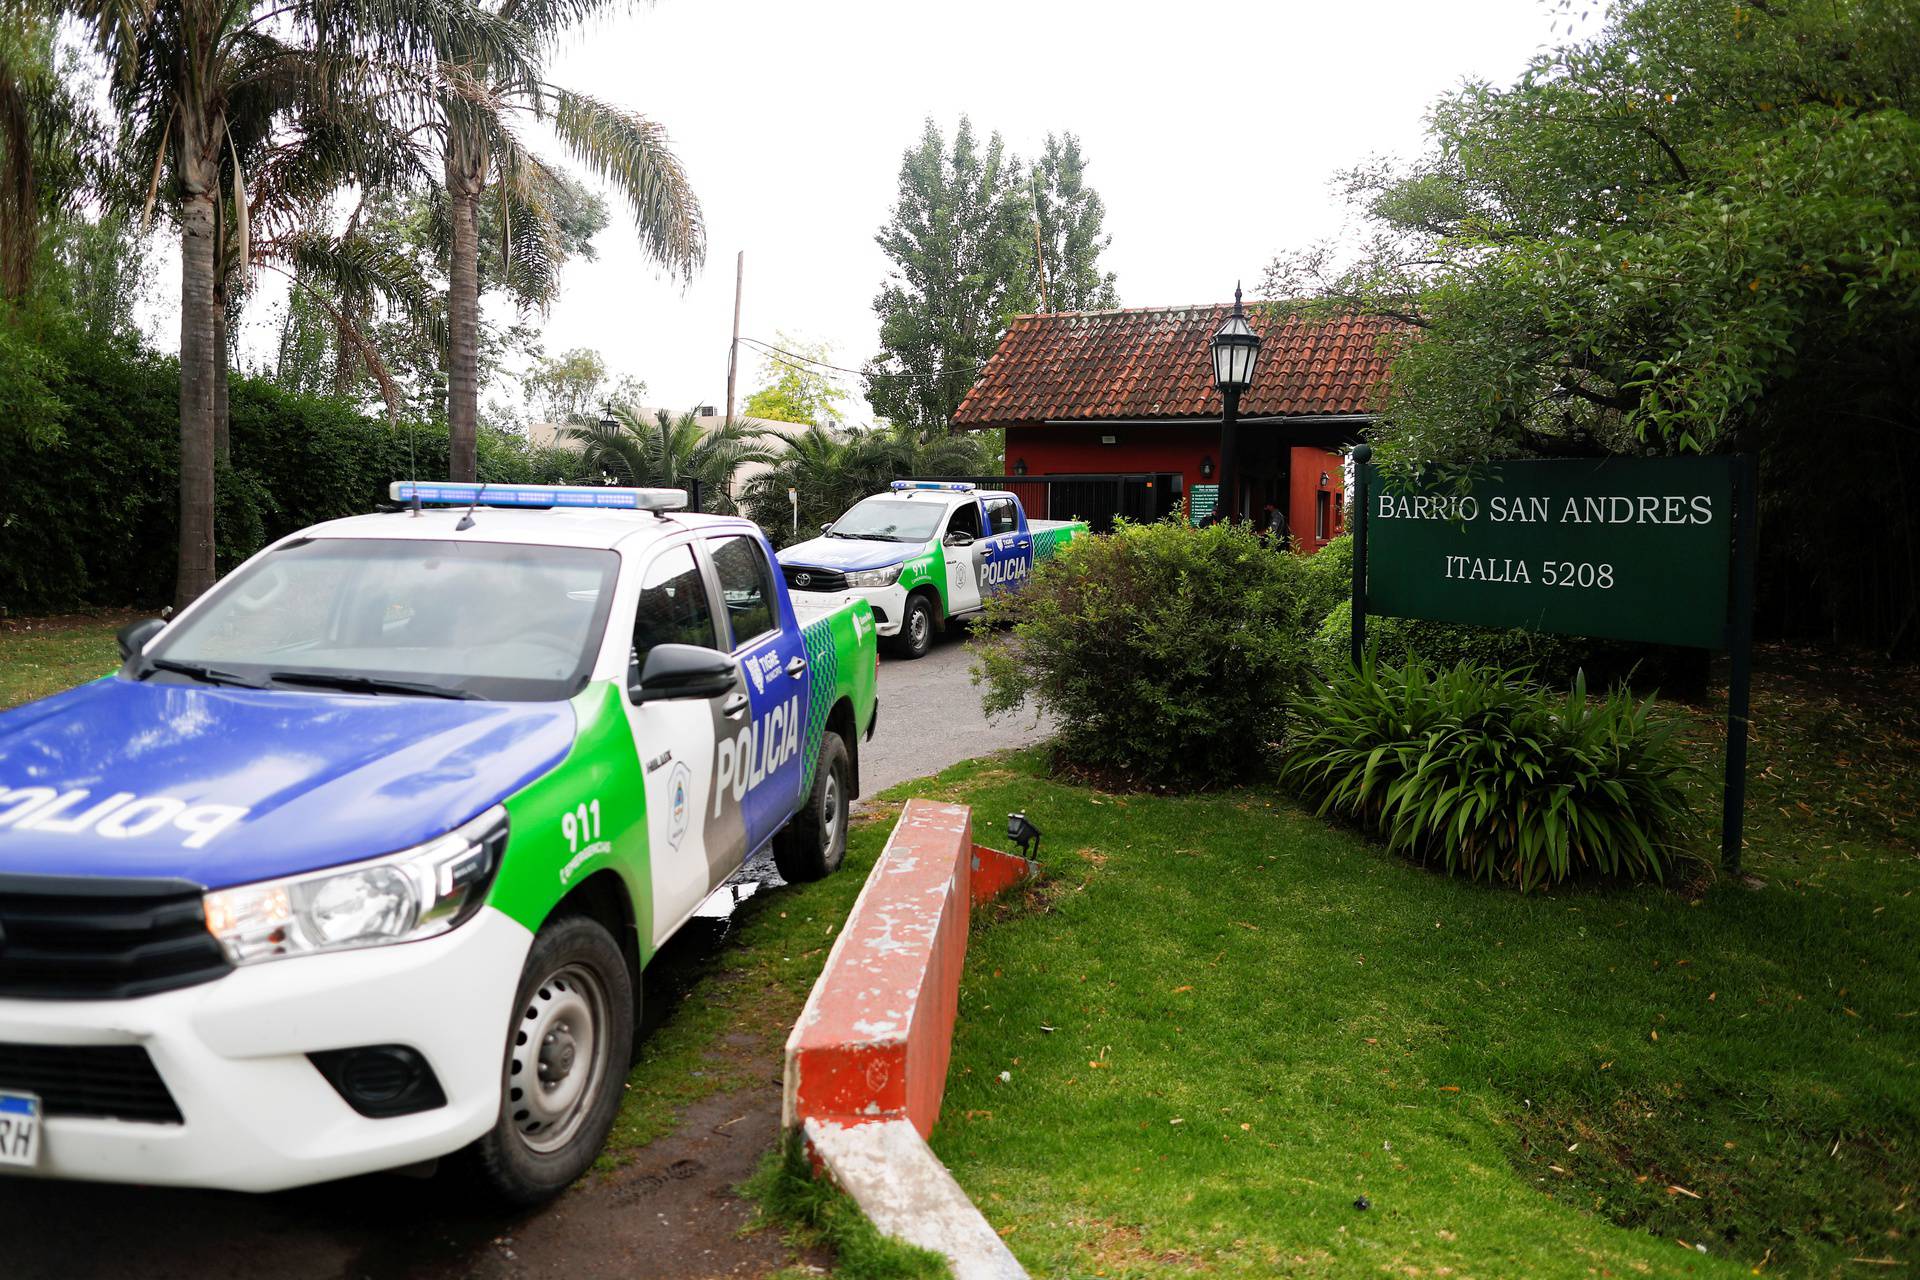 Police cars are seen outside the house where Diego Maradona was recovering from surgery, in Tigre